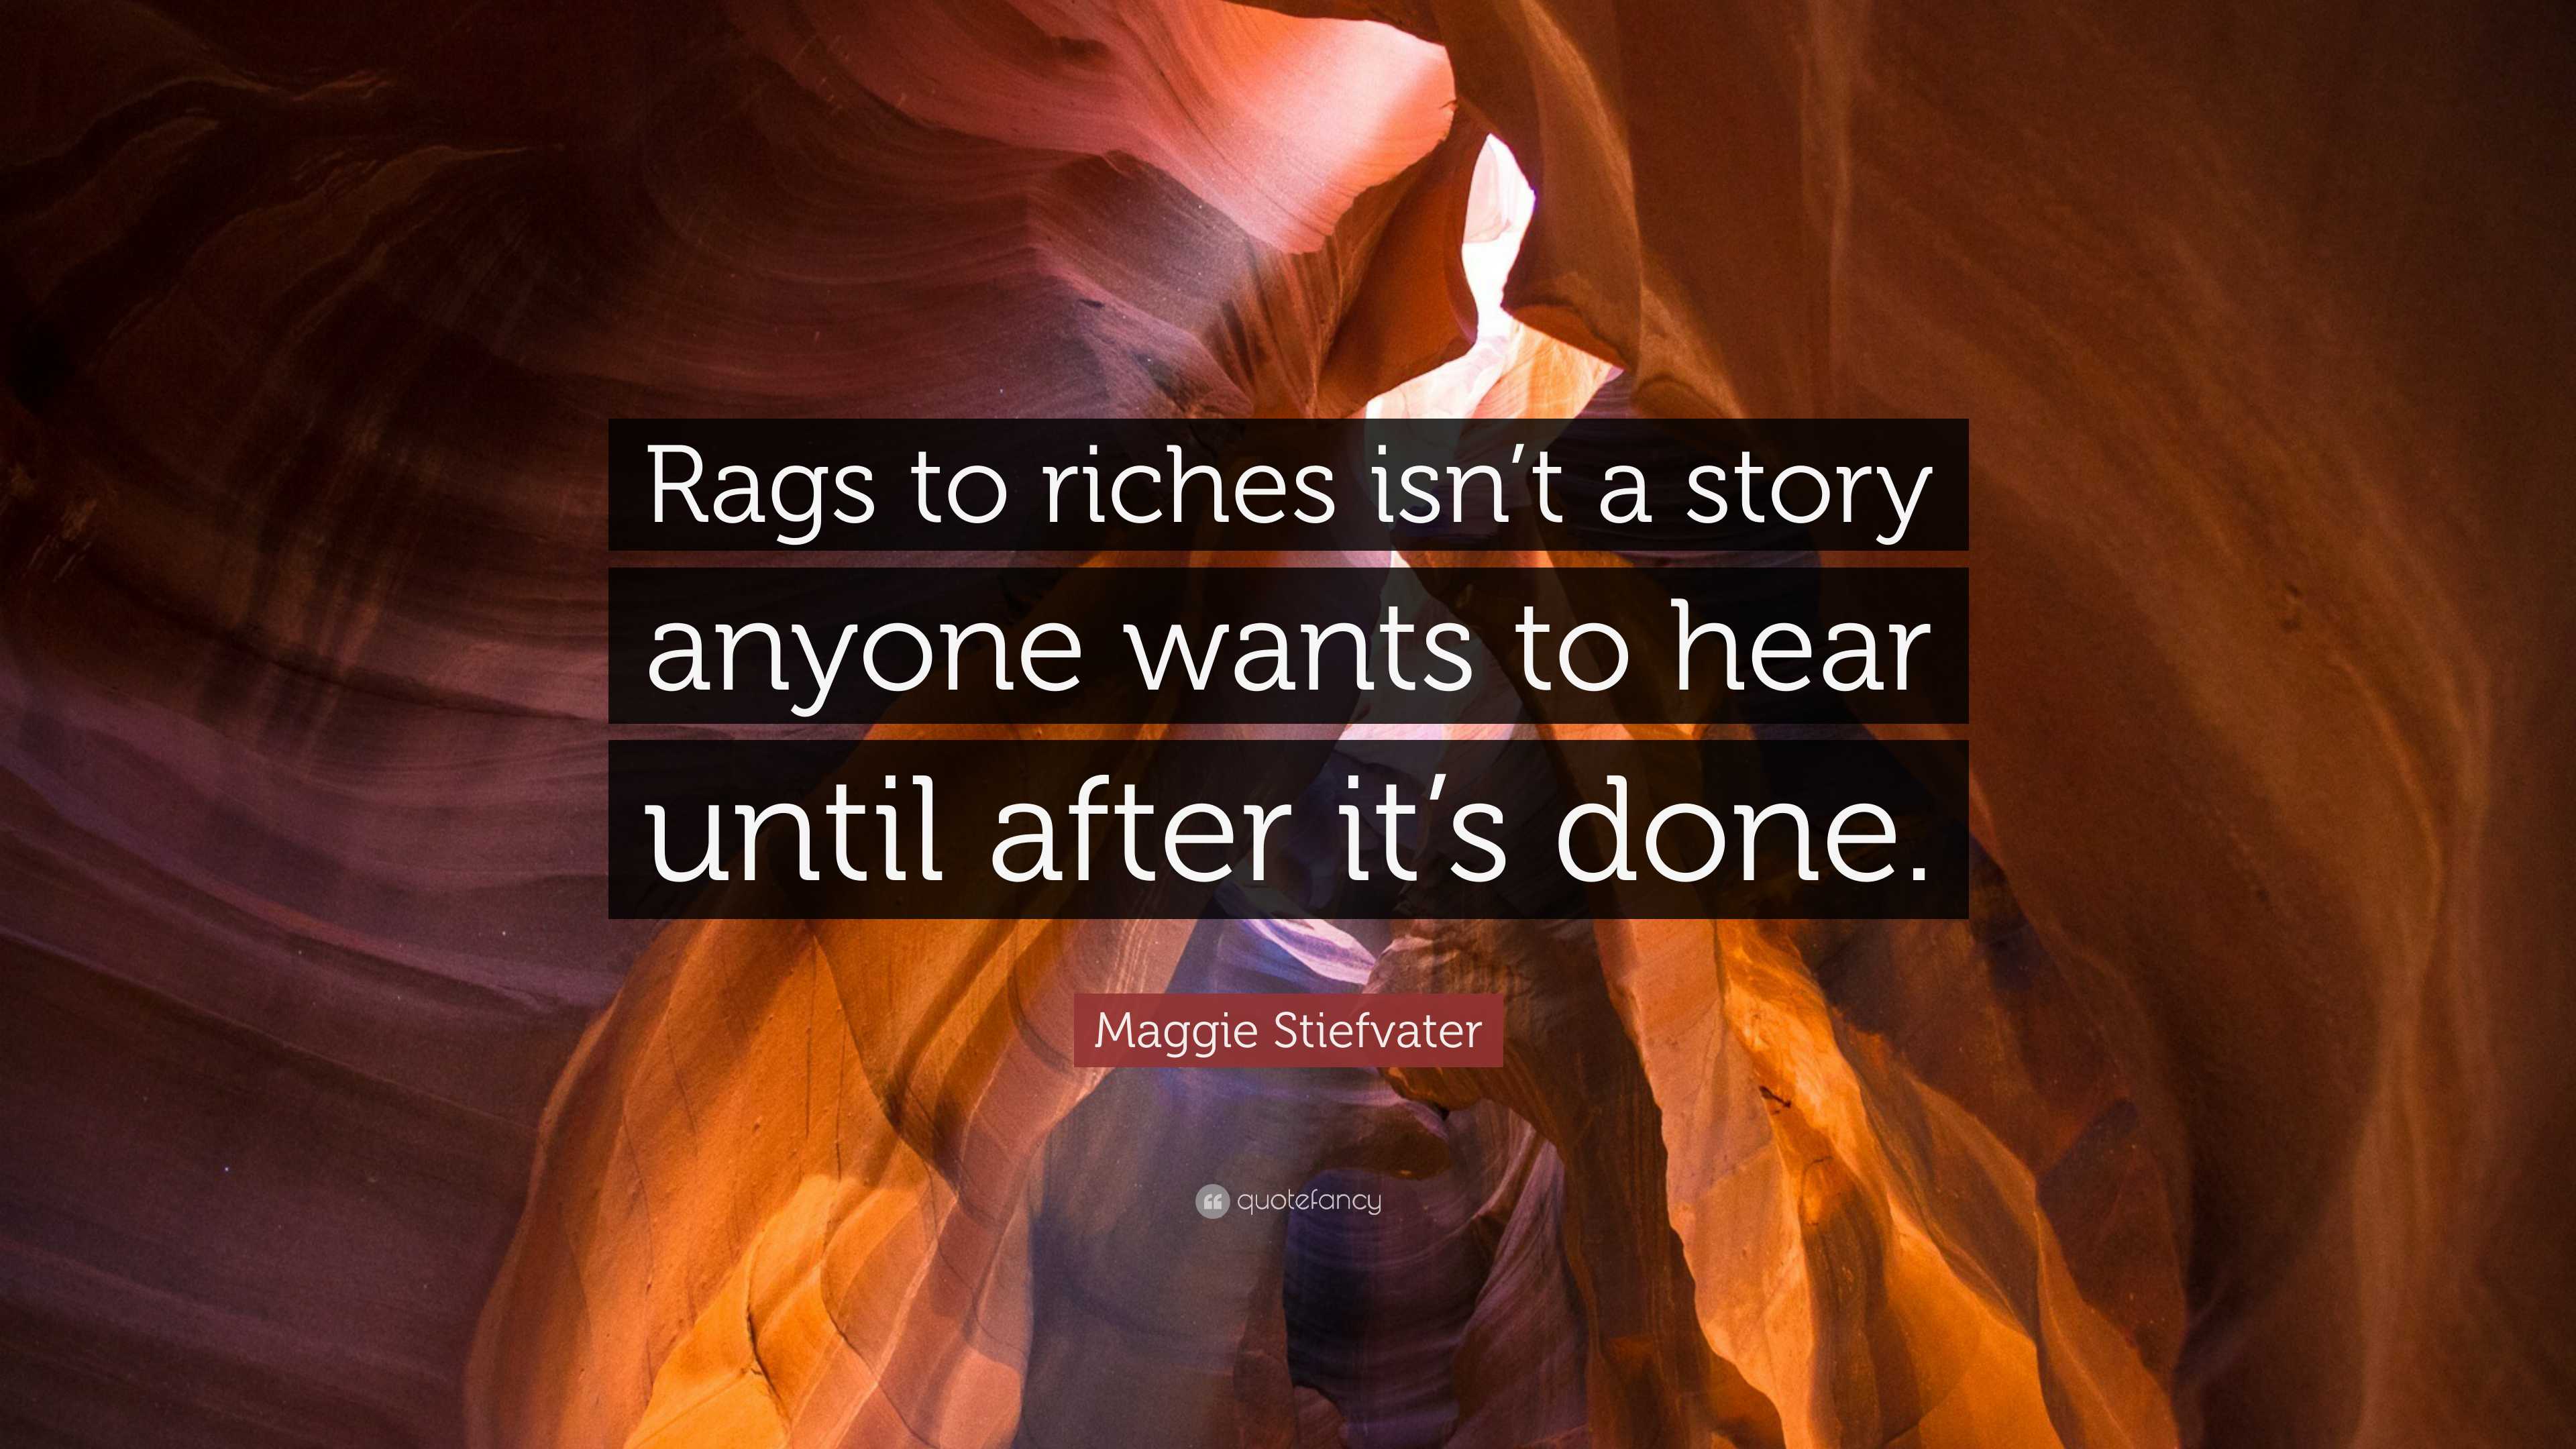 Using a Rags-to-Riches Story Won't Build Your Business